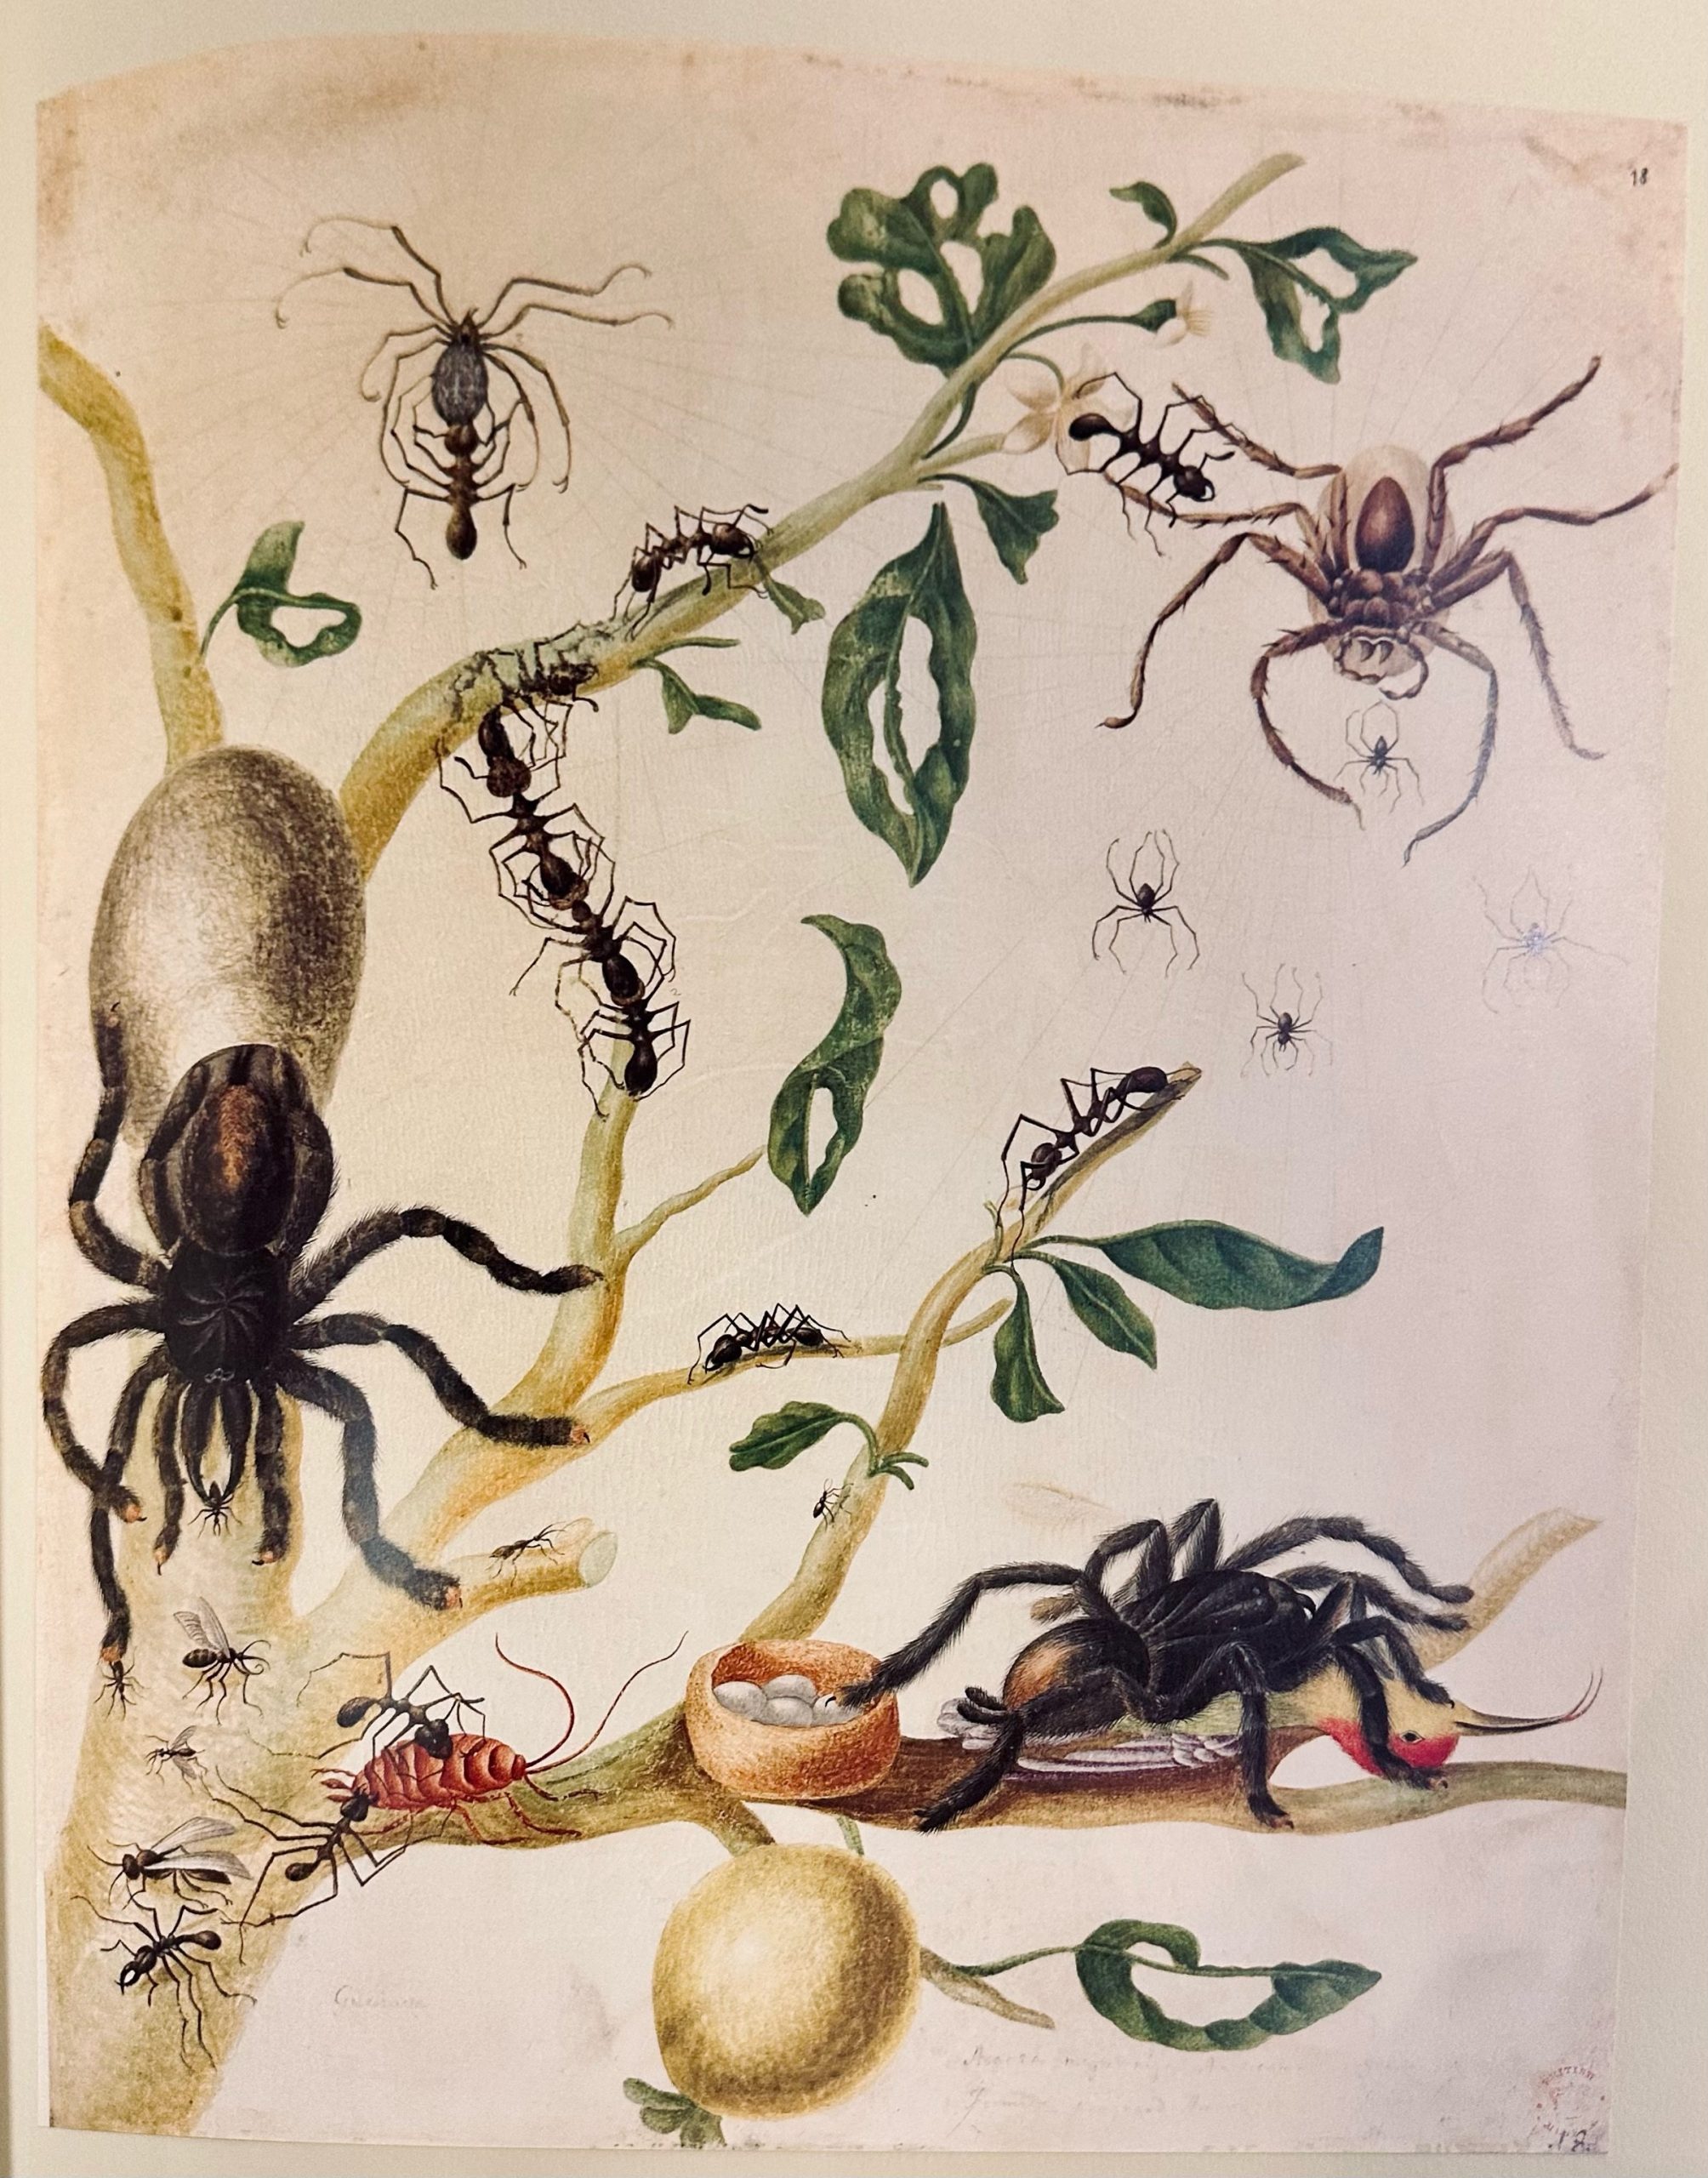 18th-century illustration of spiders crawling on plant branches